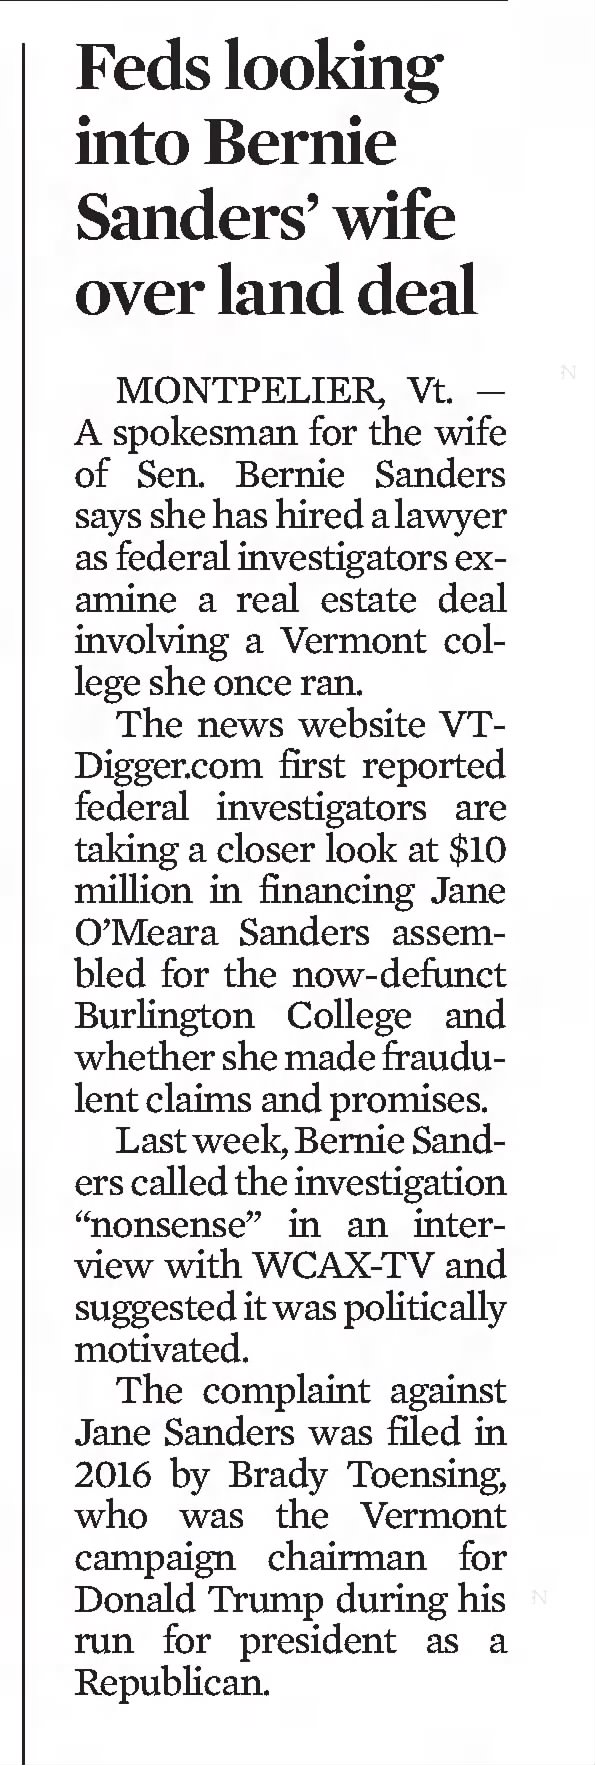 Feds looking into Bernie Sanders' wife over land deal